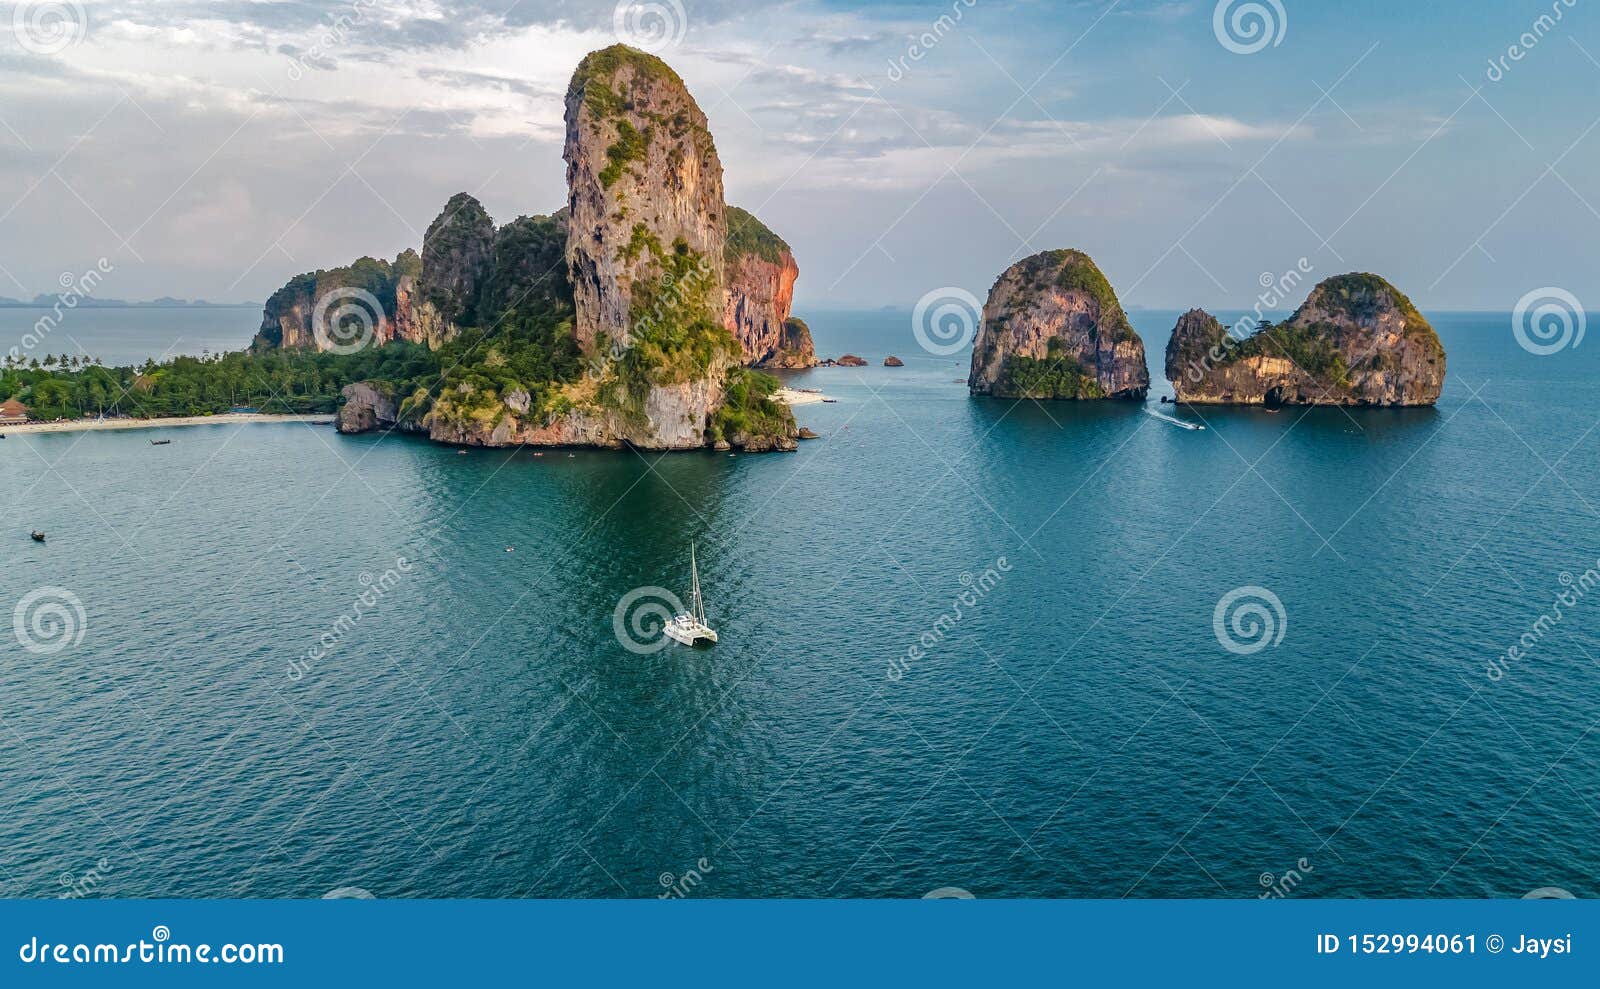 railay beach in thailand, krabi province, aerial view of tropical railay and pranang beaches and coastline of andaman sea